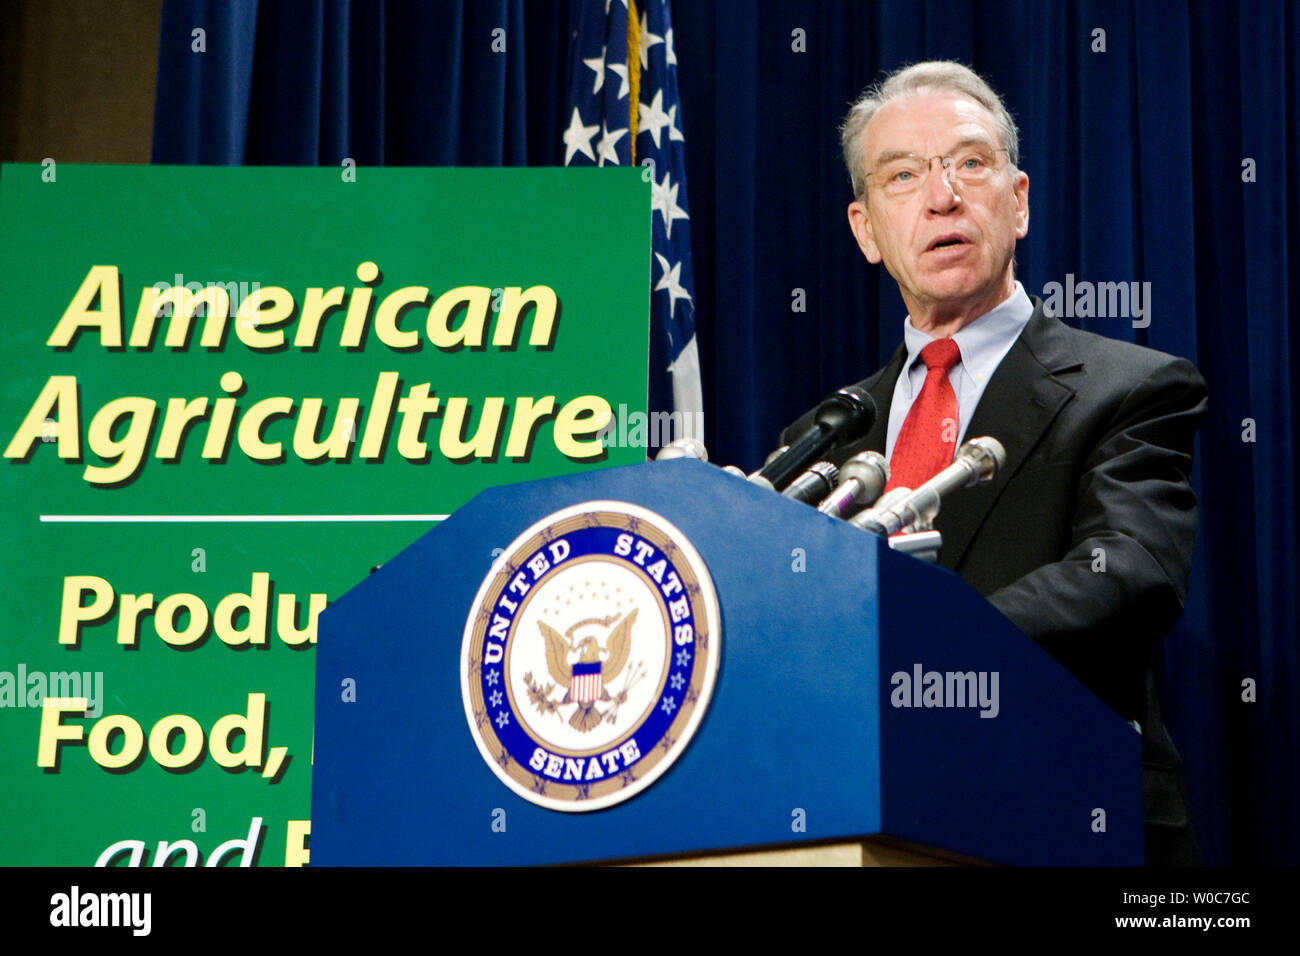 Sen. Chuck Grassley, R-IA, speaks during a news conference to dispel myths about the use of ethanol as a biofuel on Capitol Hill in Washington on May 22, 2008. (UPI Photo/Patrick D. McDermott) Stock Photo